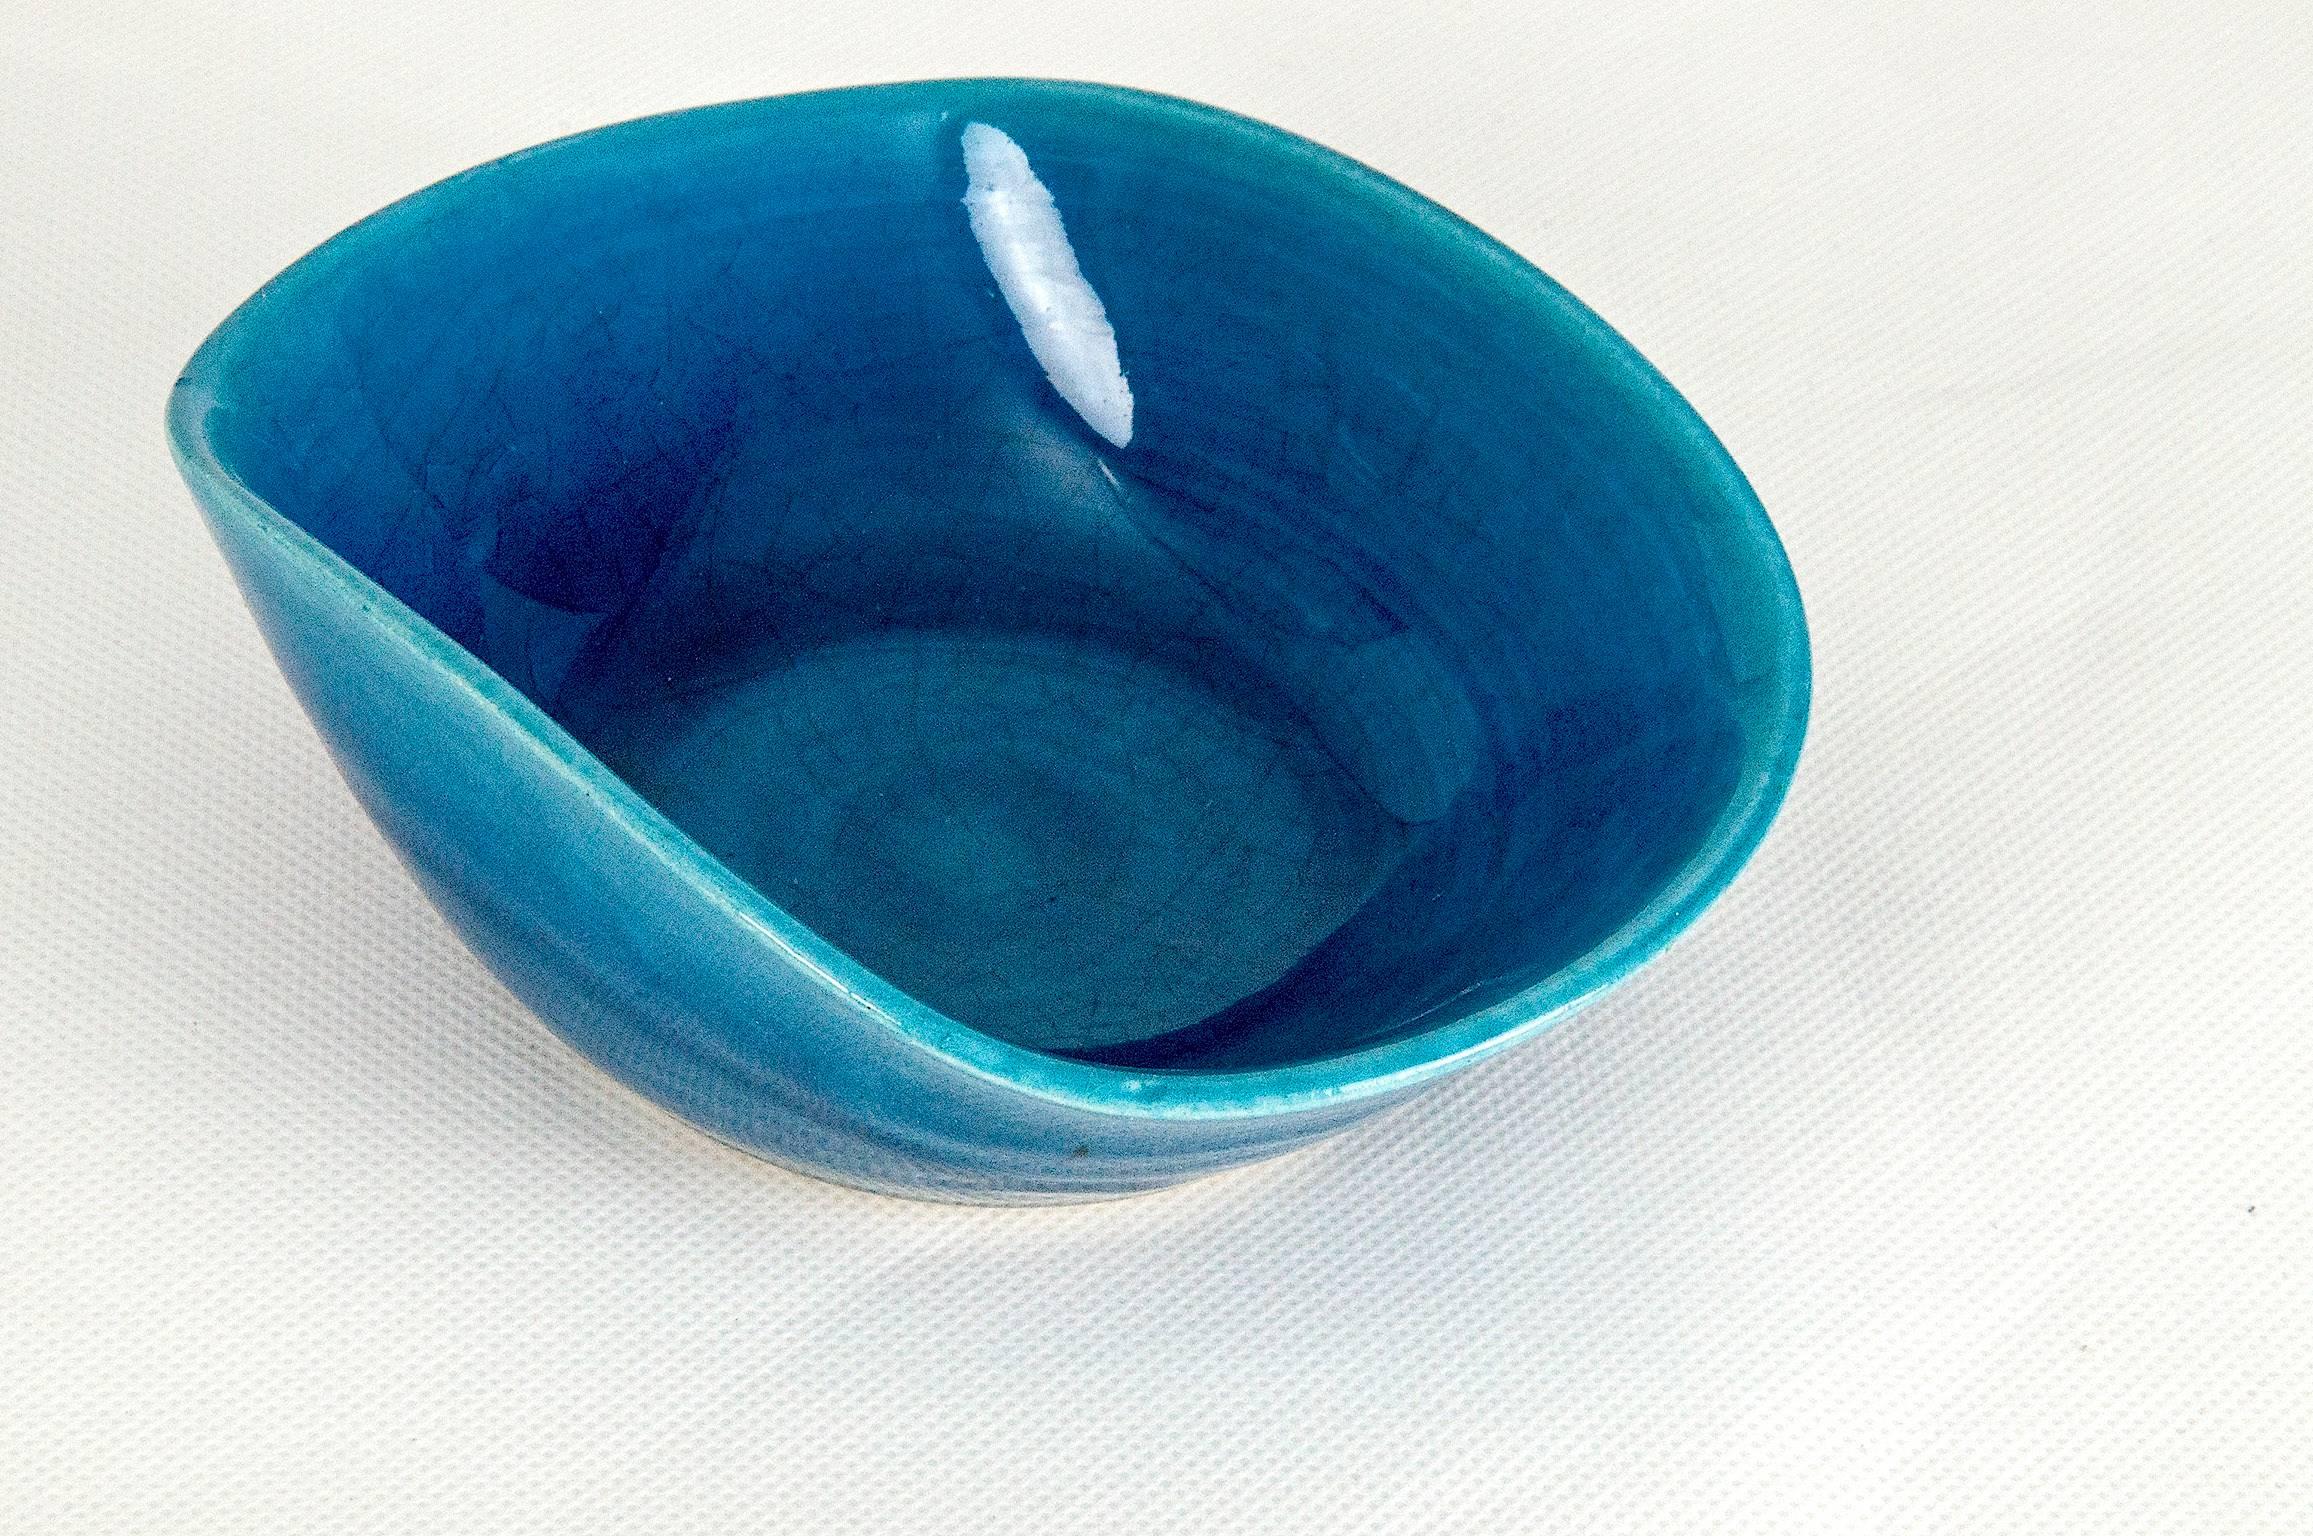 French blue cup or centrepiece in ceramic
ashtray, cracked ceramic.